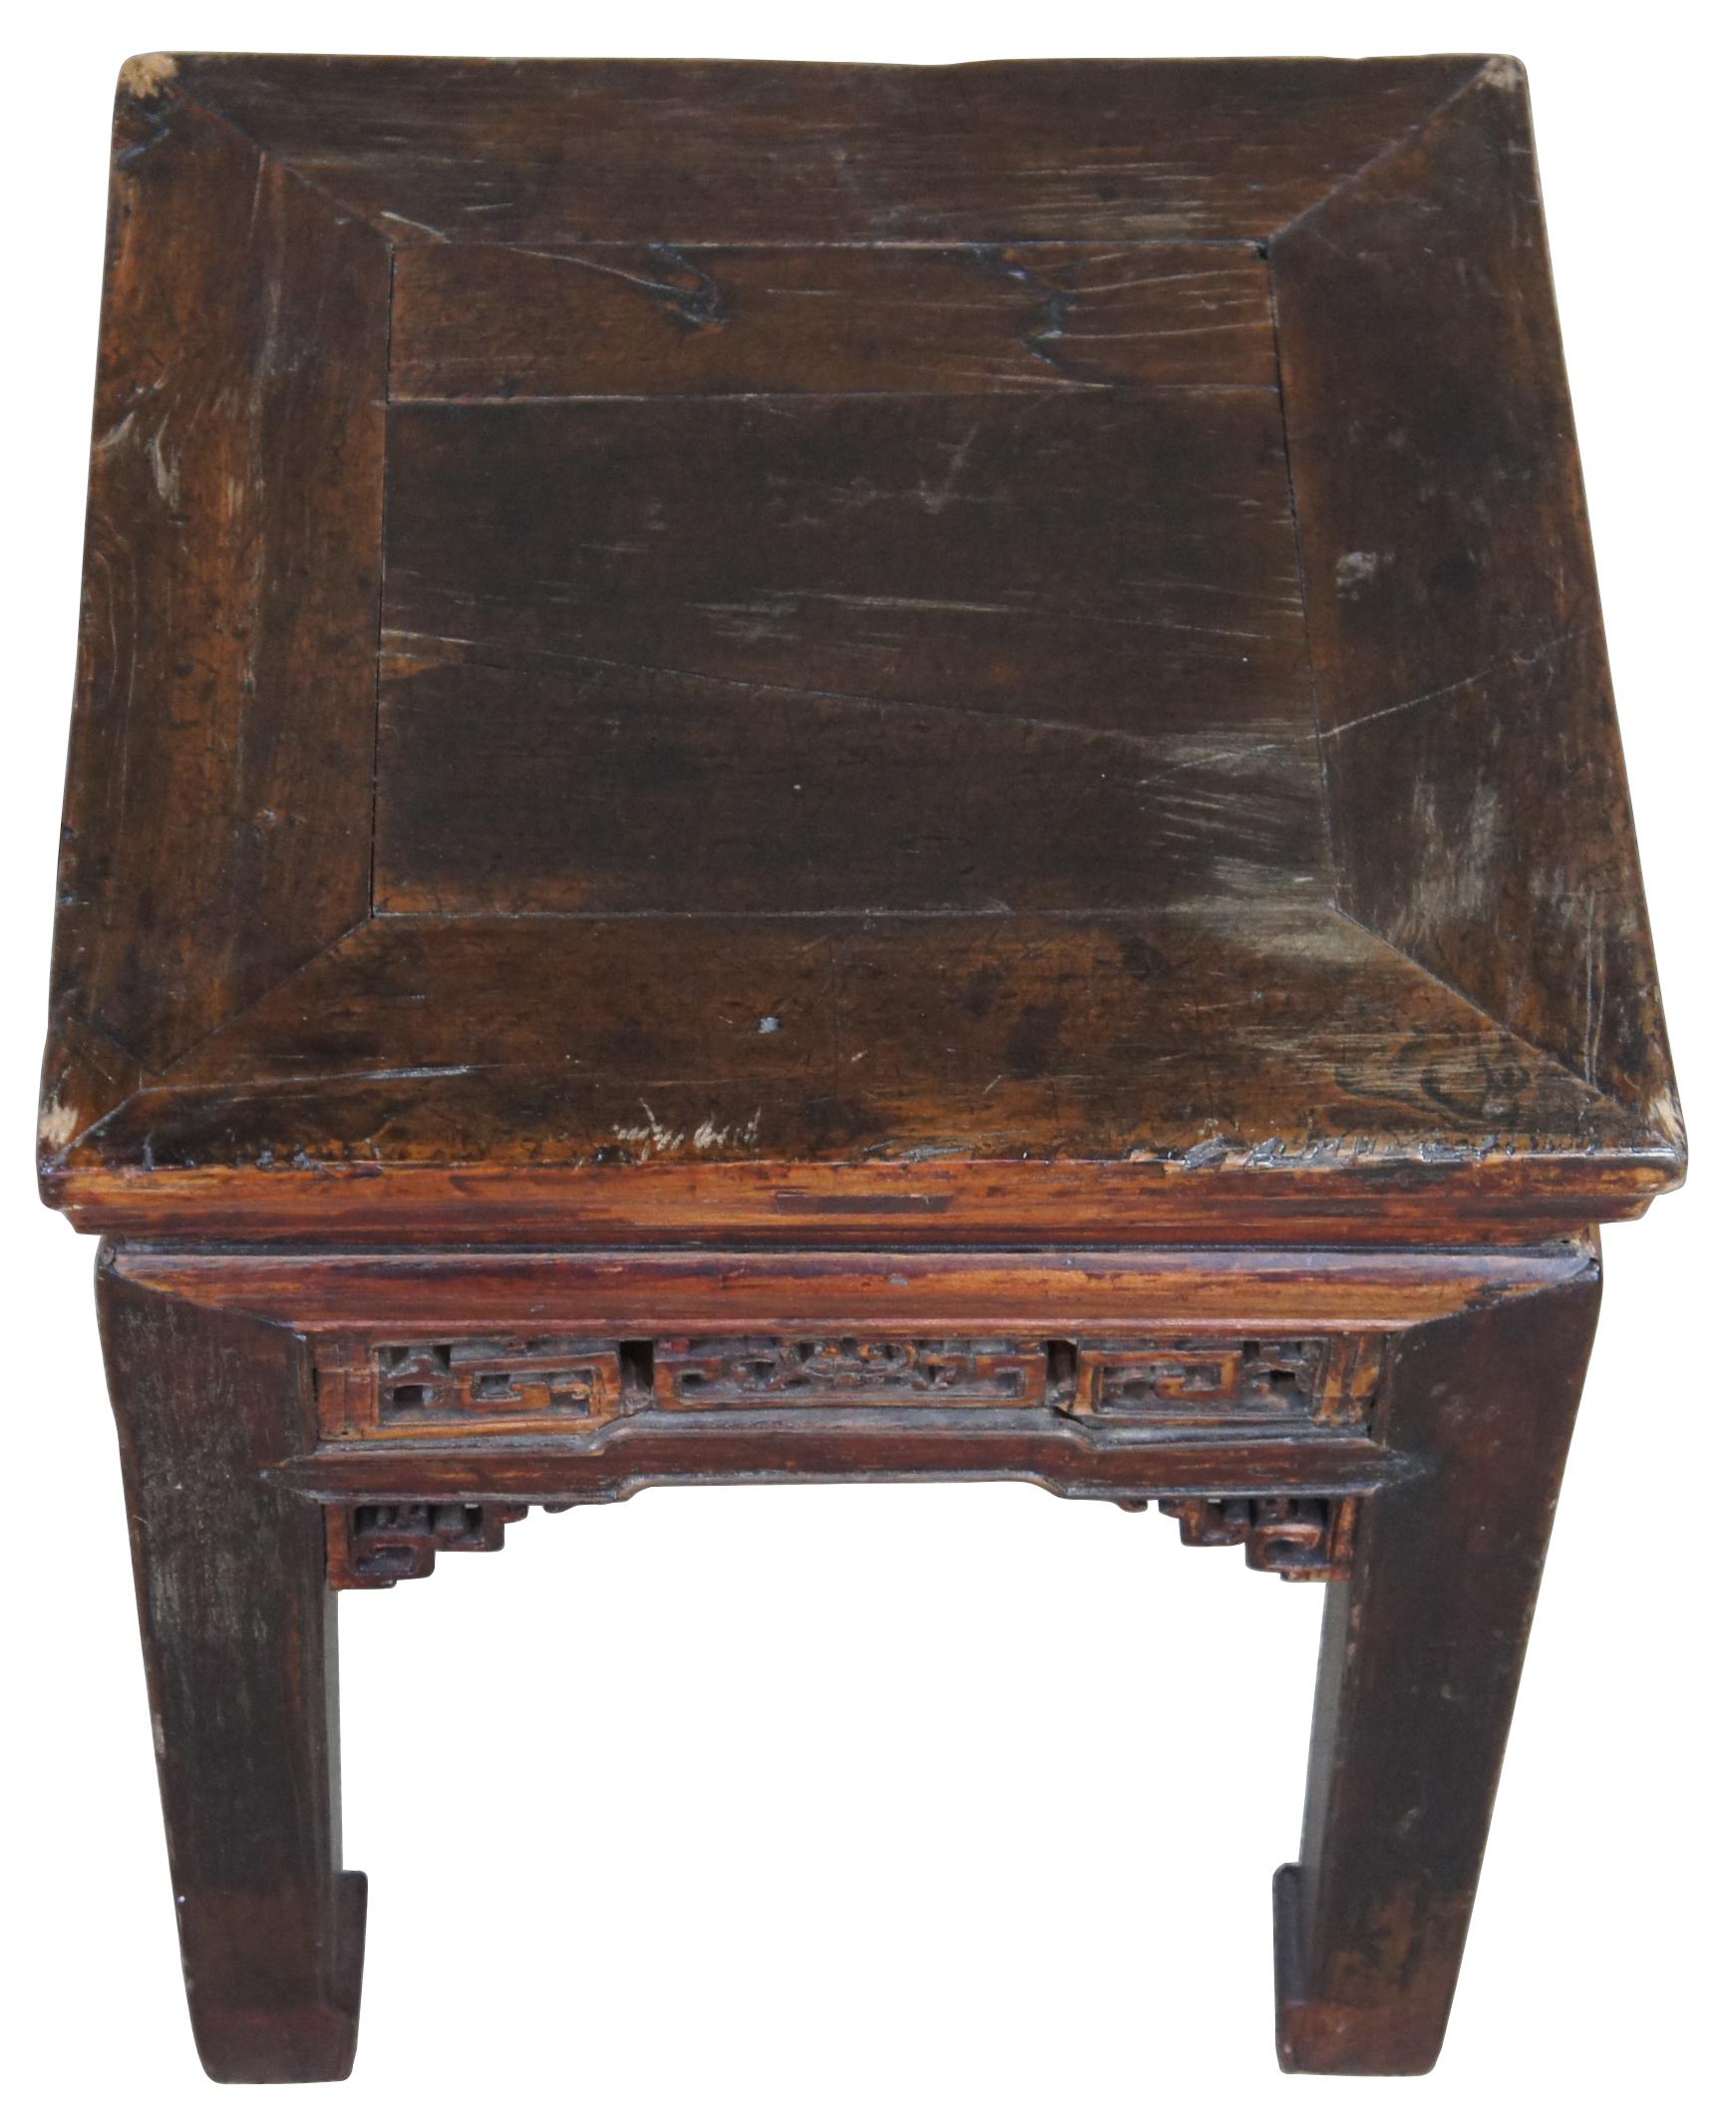 Antique Ming dynasty style table. Made from elm with mortise and Tenon joints and intricately caved fretwork.
   